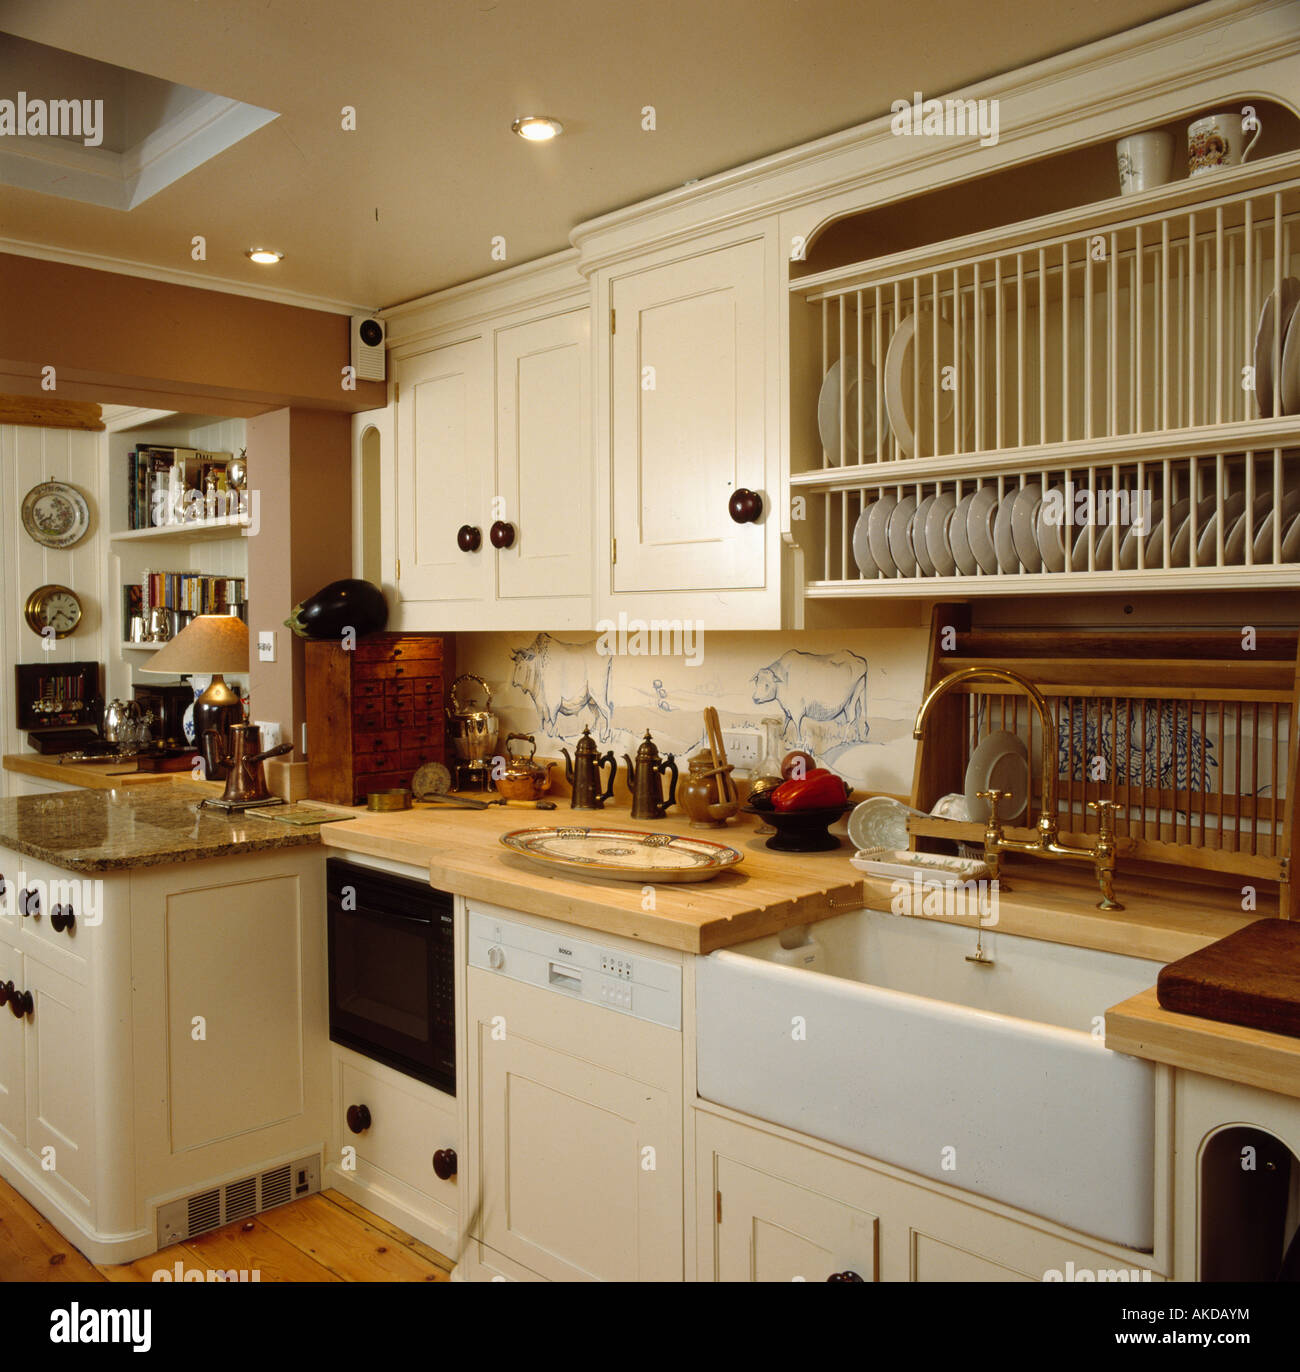 Plate rack above white ceramic sink and integral dishwasher in neutral kitchen Stock Photo